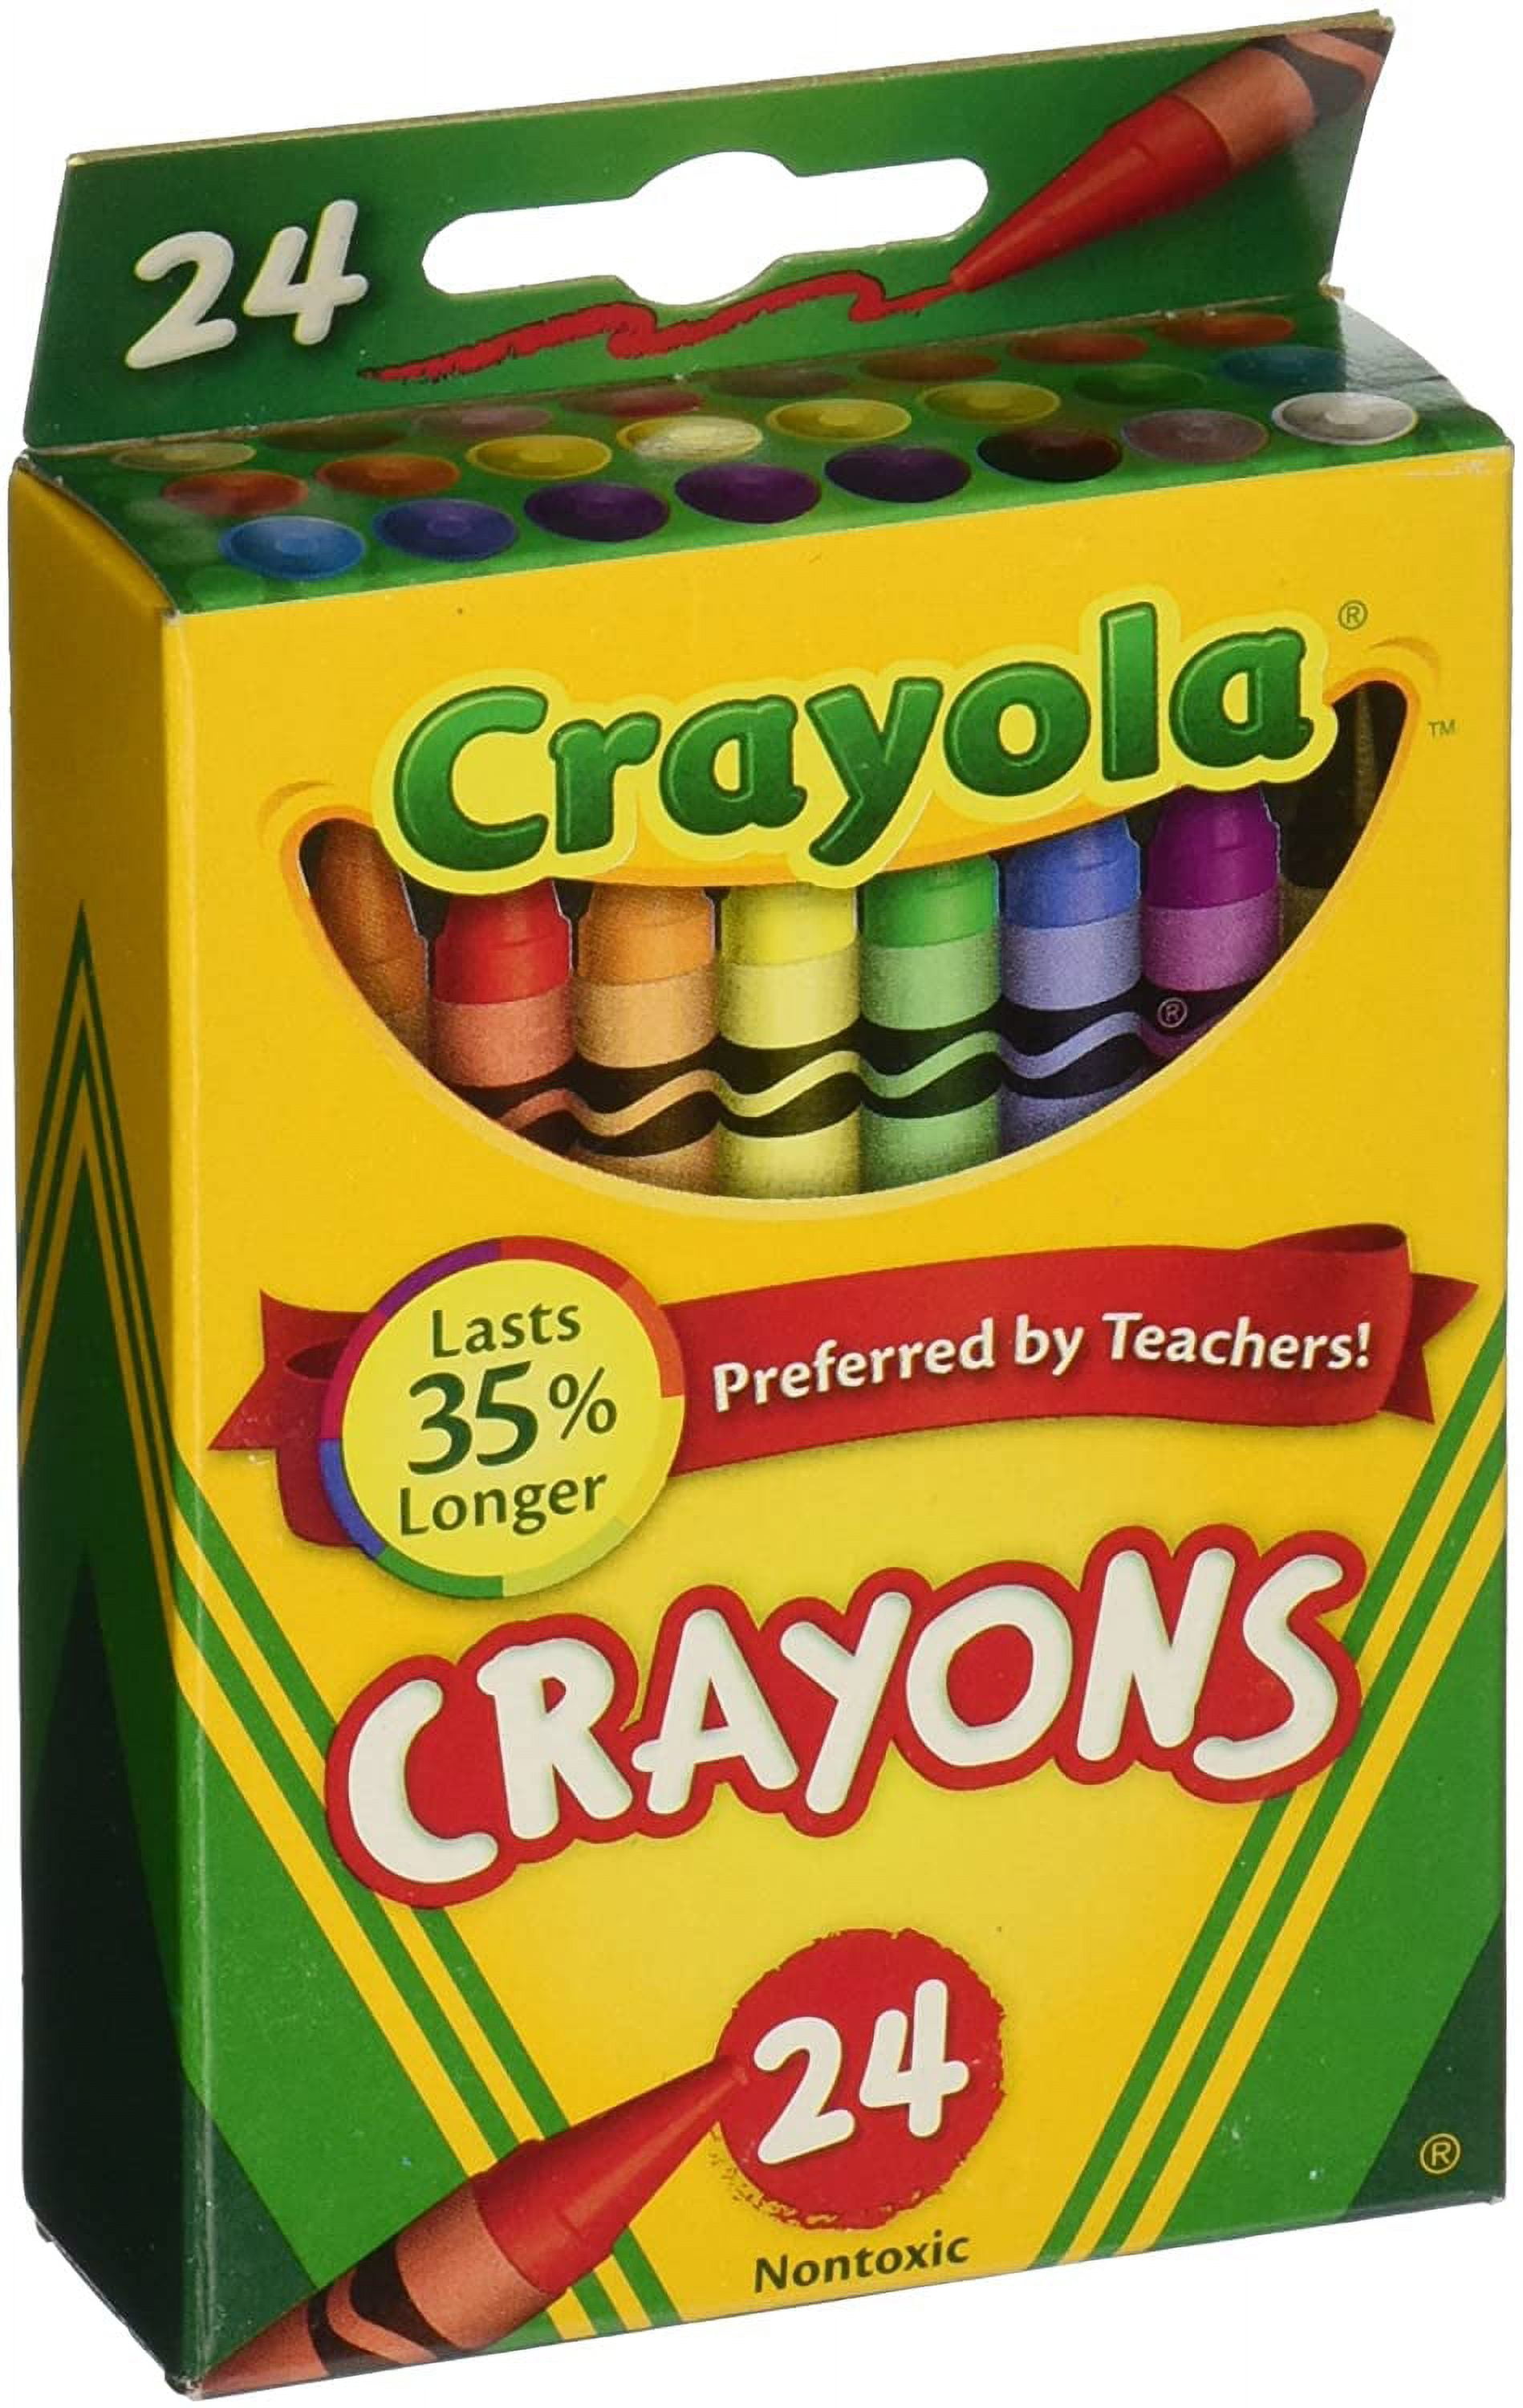 Crayola Crayons 24-Packs Only 33¢ Each at OfficeDepot.com + More School  Supply Deals